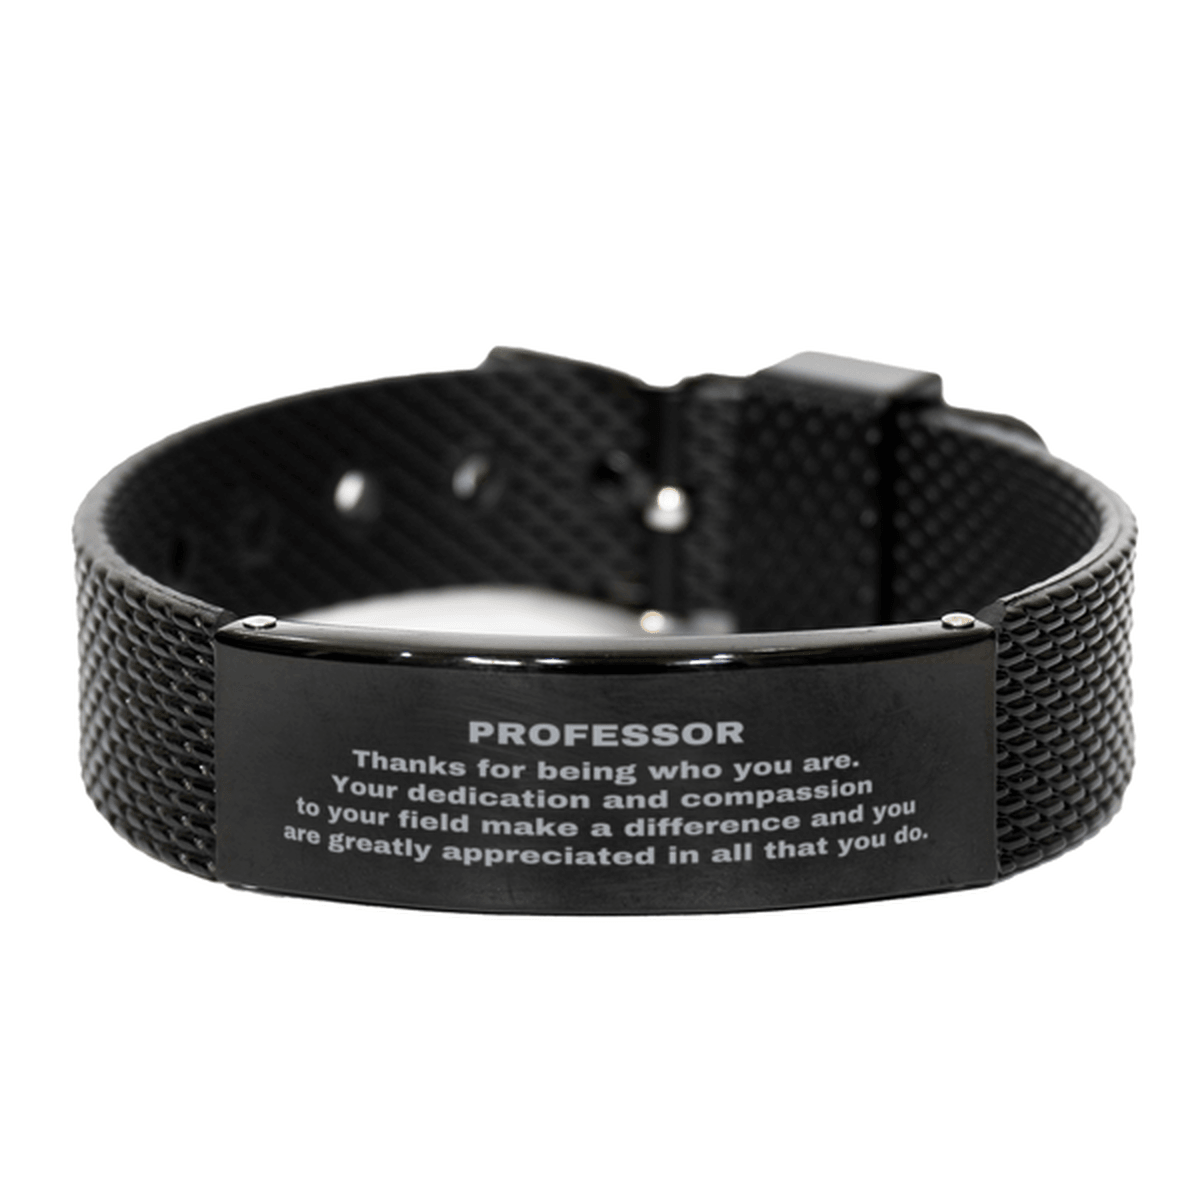 Professor Black Shark Mesh Stainless Steel Engraved Bracelet - Thanks for being who you are - Birthday Christmas Jewelry Gifts Coworkers Colleague Boss - Mallard Moon Gift Shop